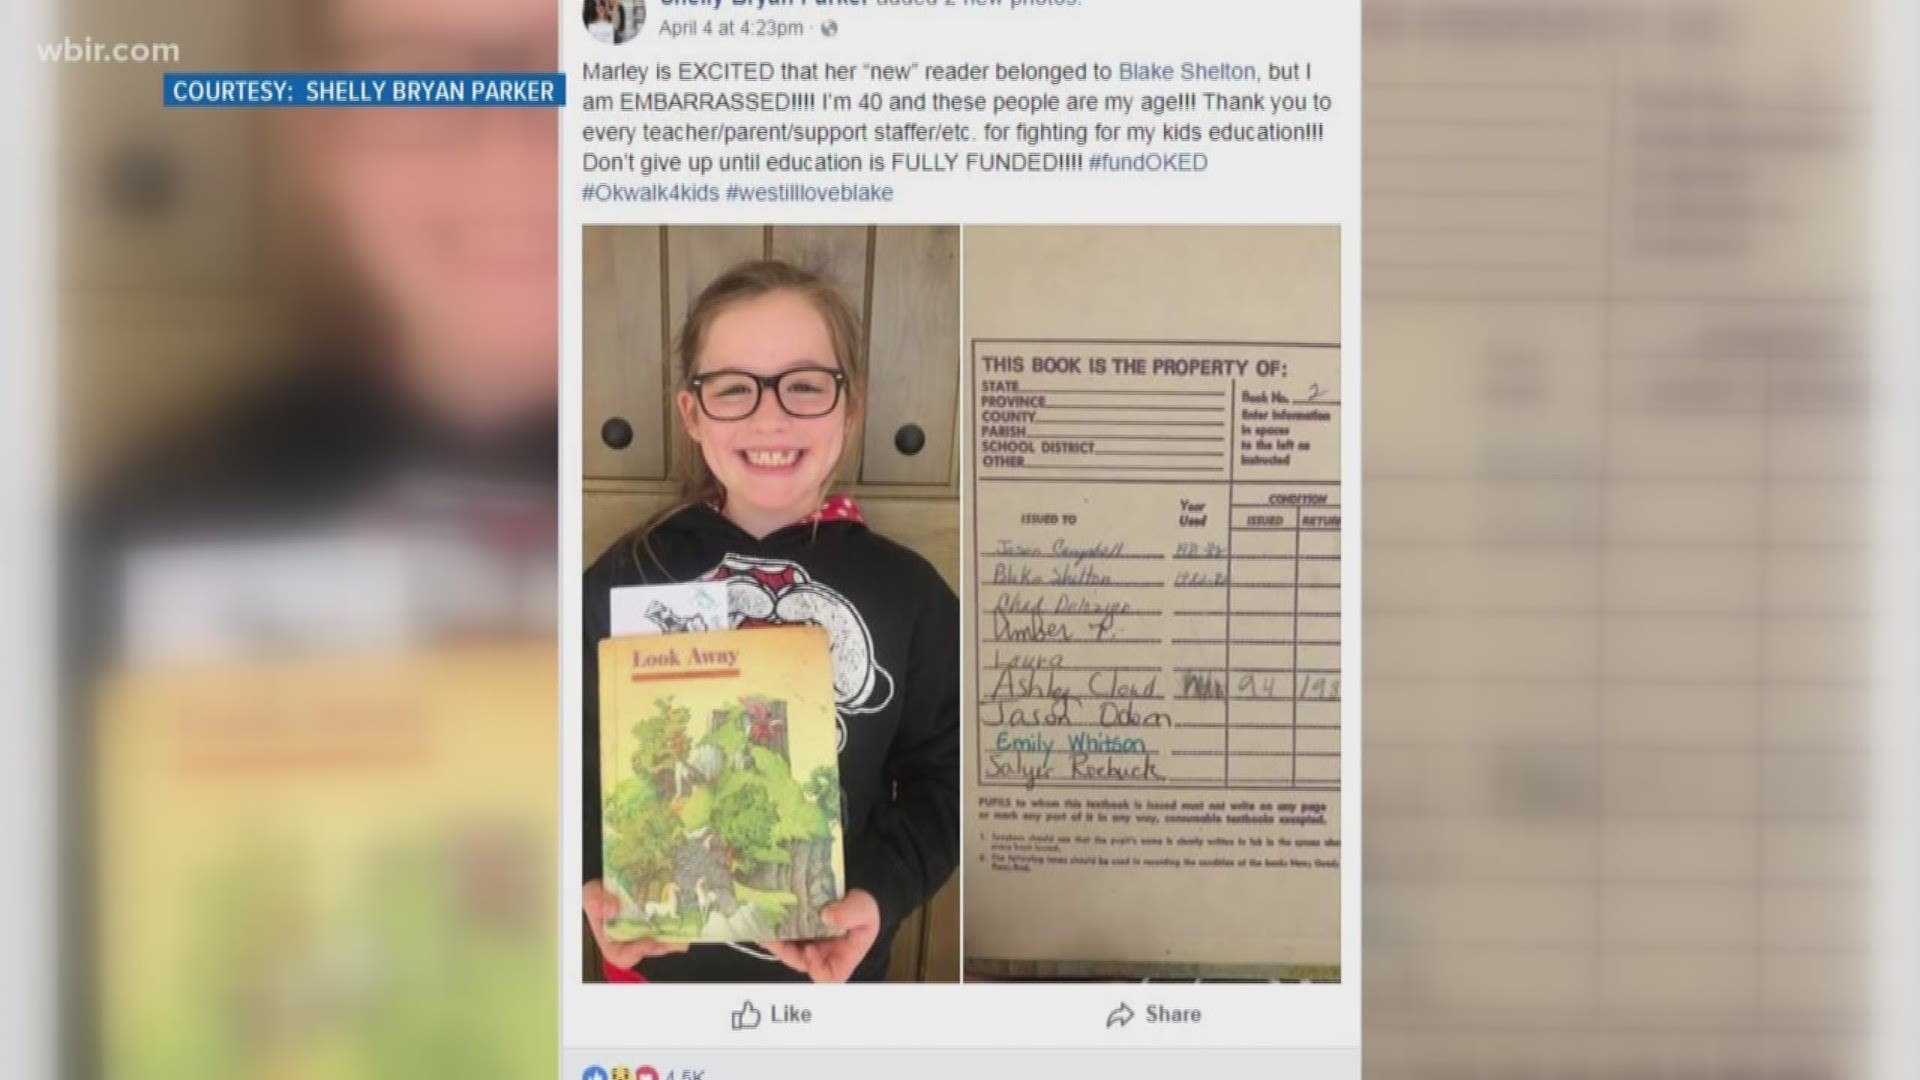 A little girl in Oklahoma was excited to see Blake Shelton's name in a book she checked out from school.